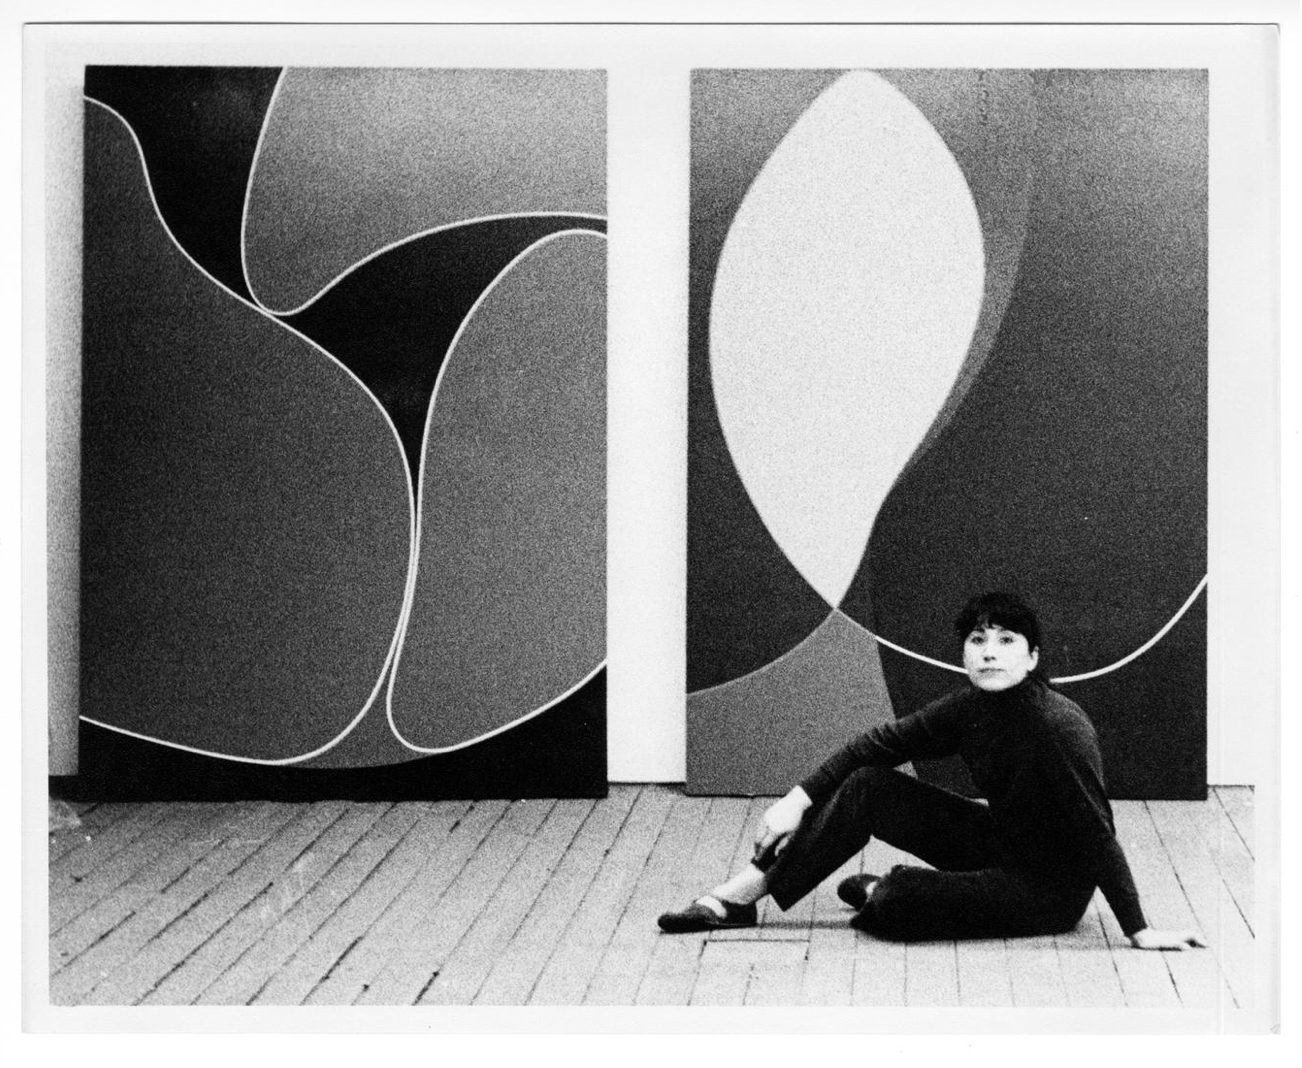 Virginia Jaramillo in her studio on Spring Street, New York City, 1968. Photo by Mitchell Trout, courtesy Virginia Jaramillo and Hales, London and New York